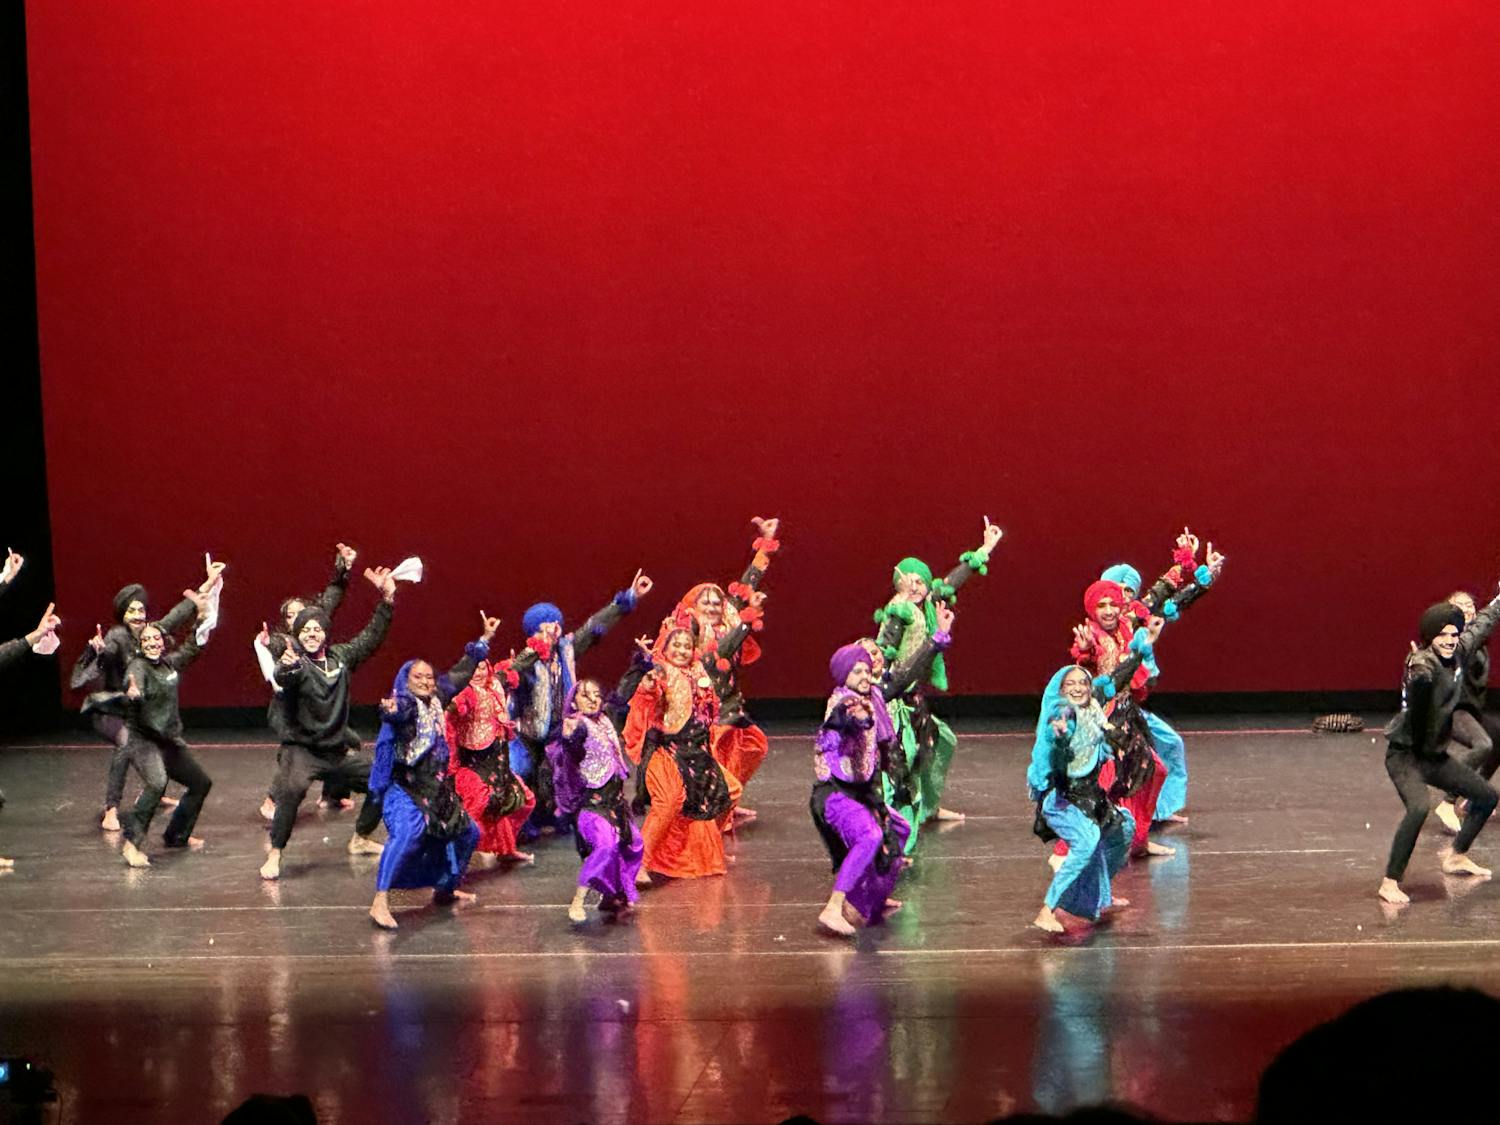 Performers wore bright, intricate outfits at this year's International Fiesta.